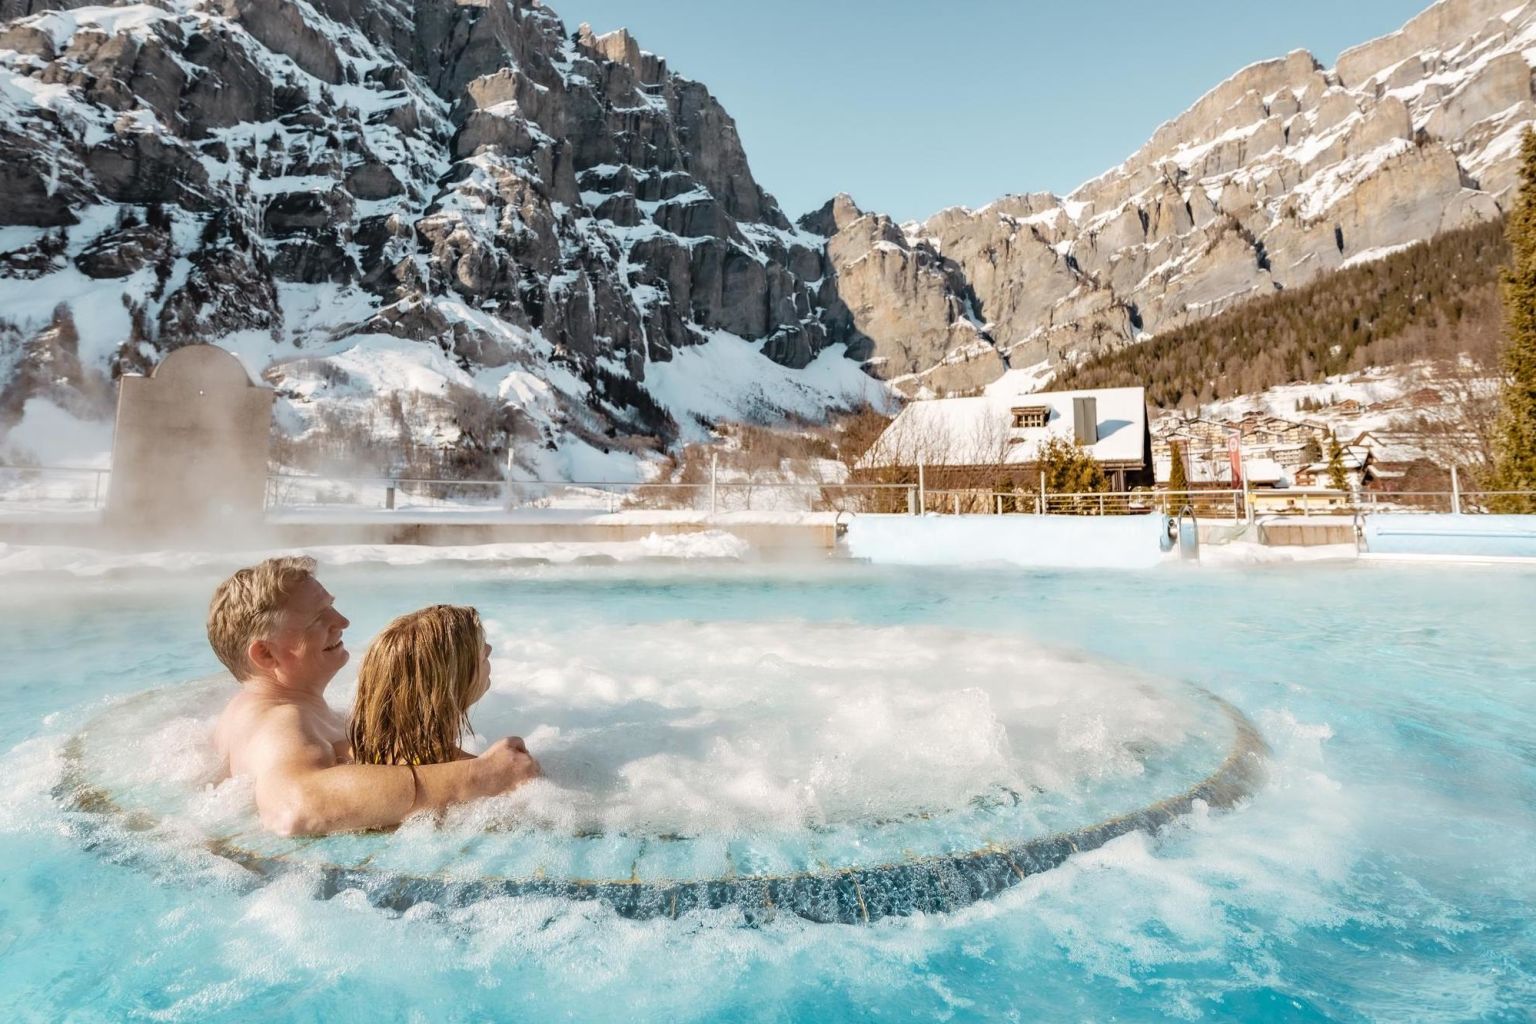 Two people admiring the view from the thermal baths of Leukerbad. Valais, Switzerland